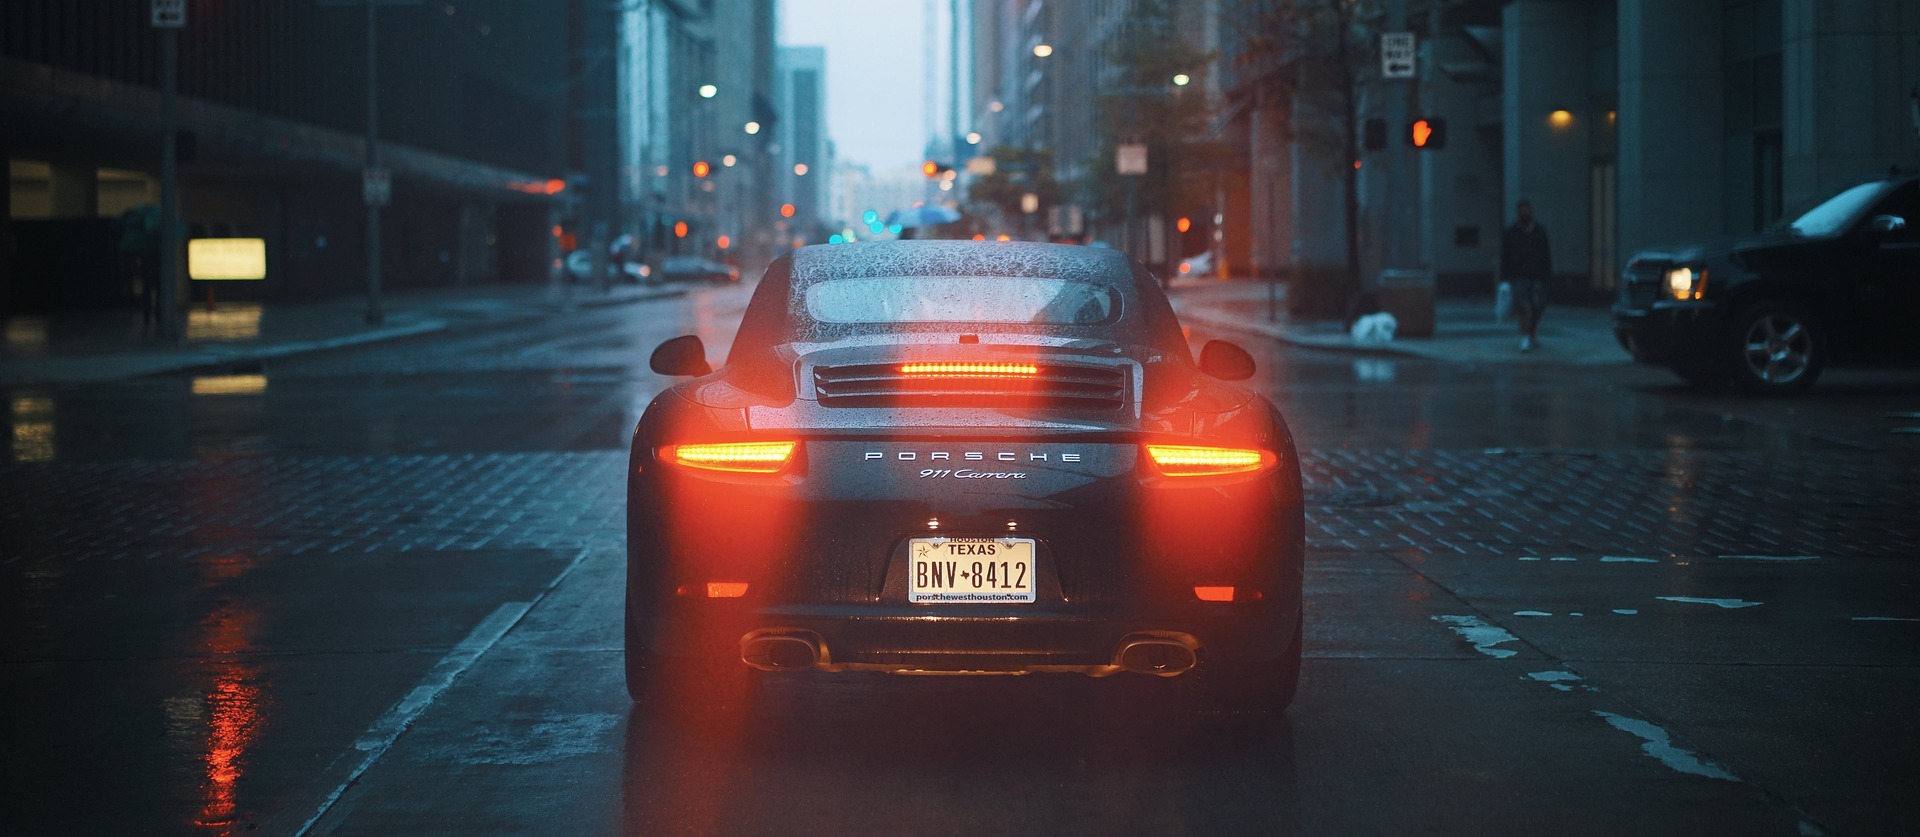 A Porsche vehicle shot from behind on a rainy night